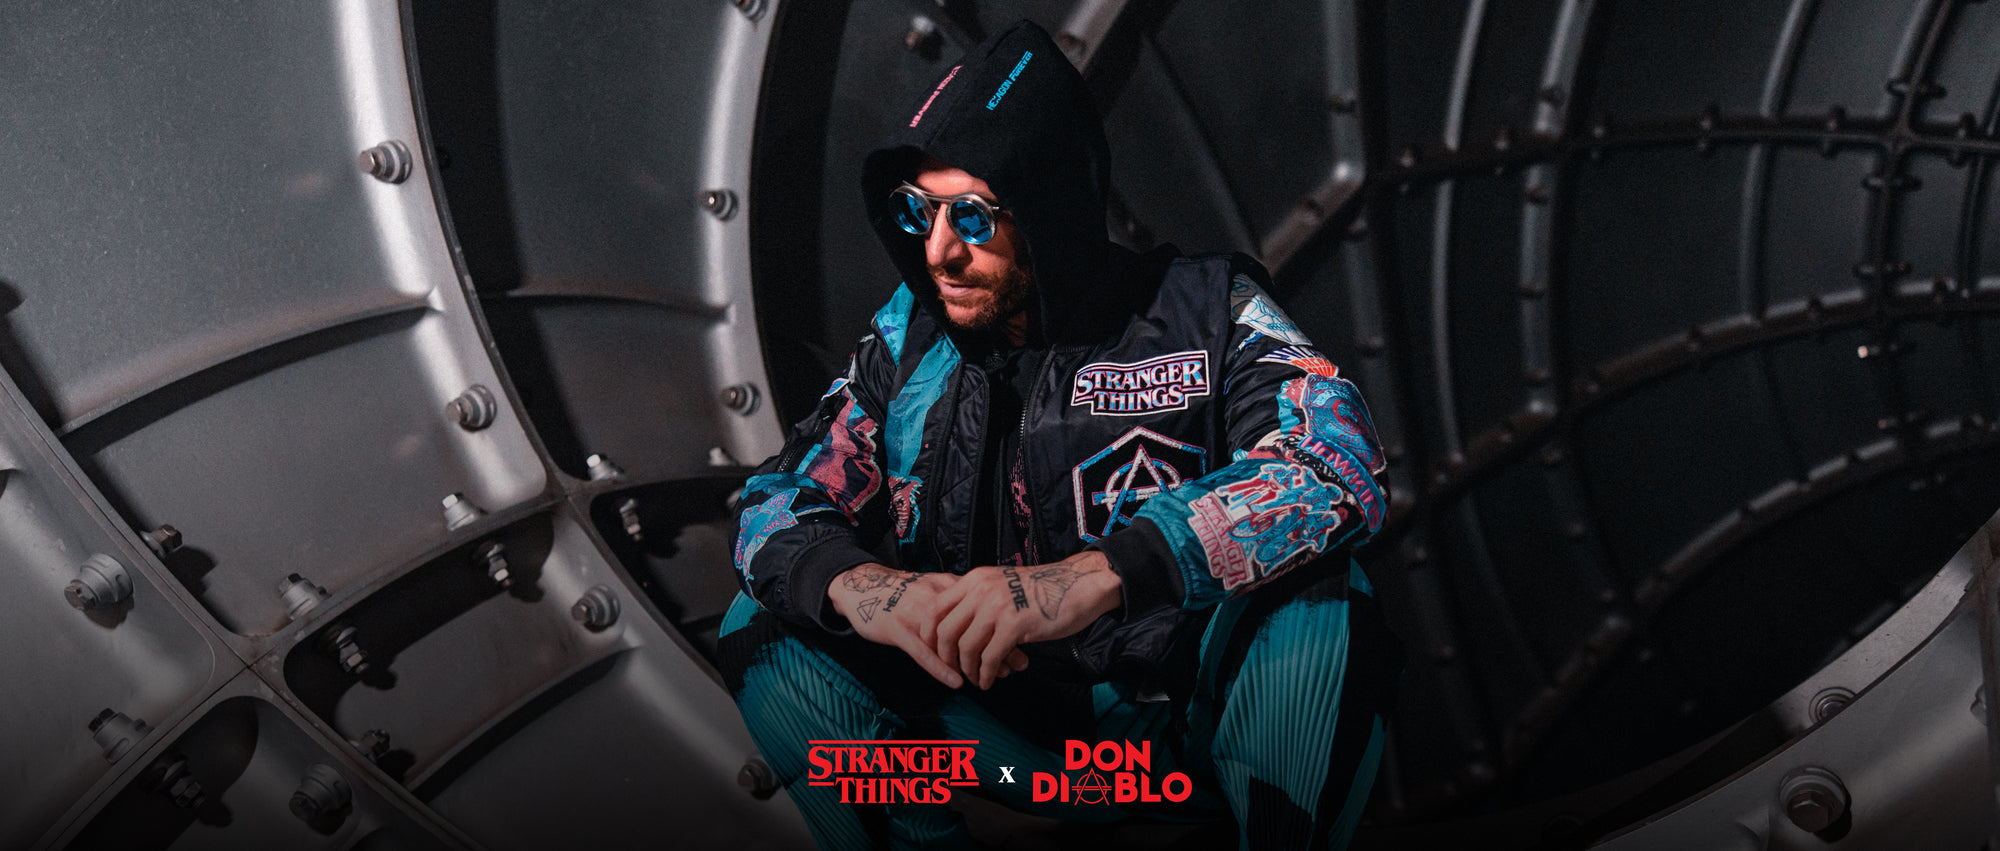 Don Diablo wearing his new collection together with Stranger Things and Netflix.